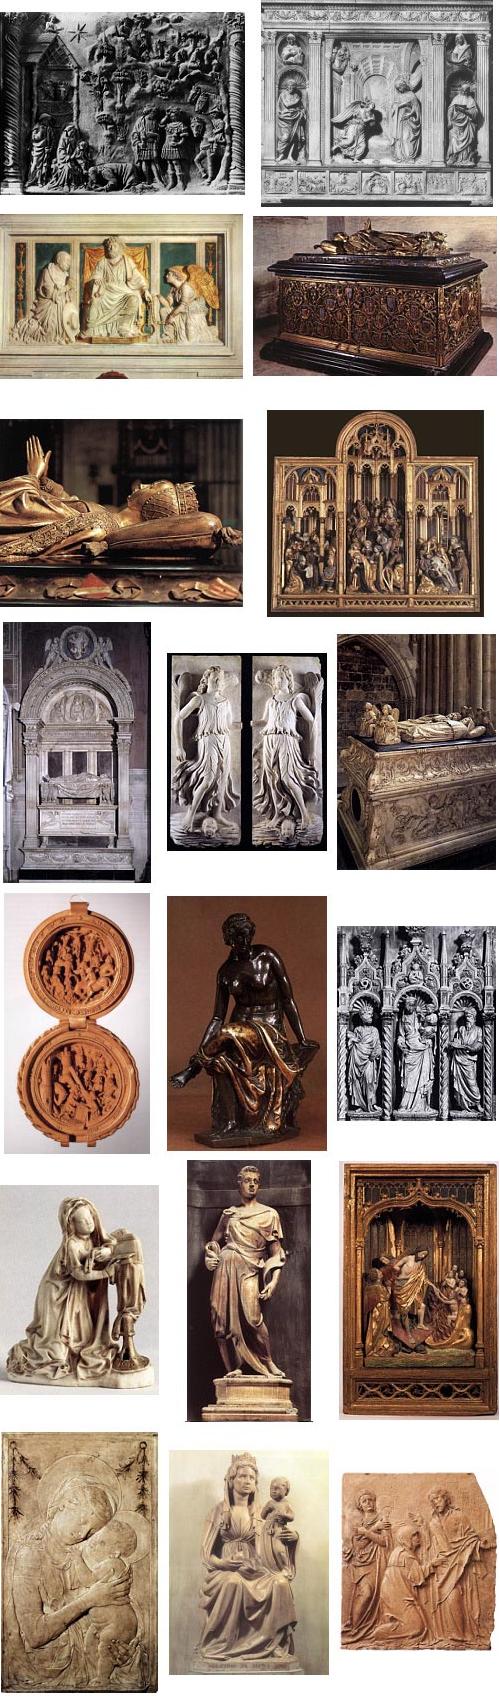 Medieval European Sculptors - 2 (Artists, Works and Periods)